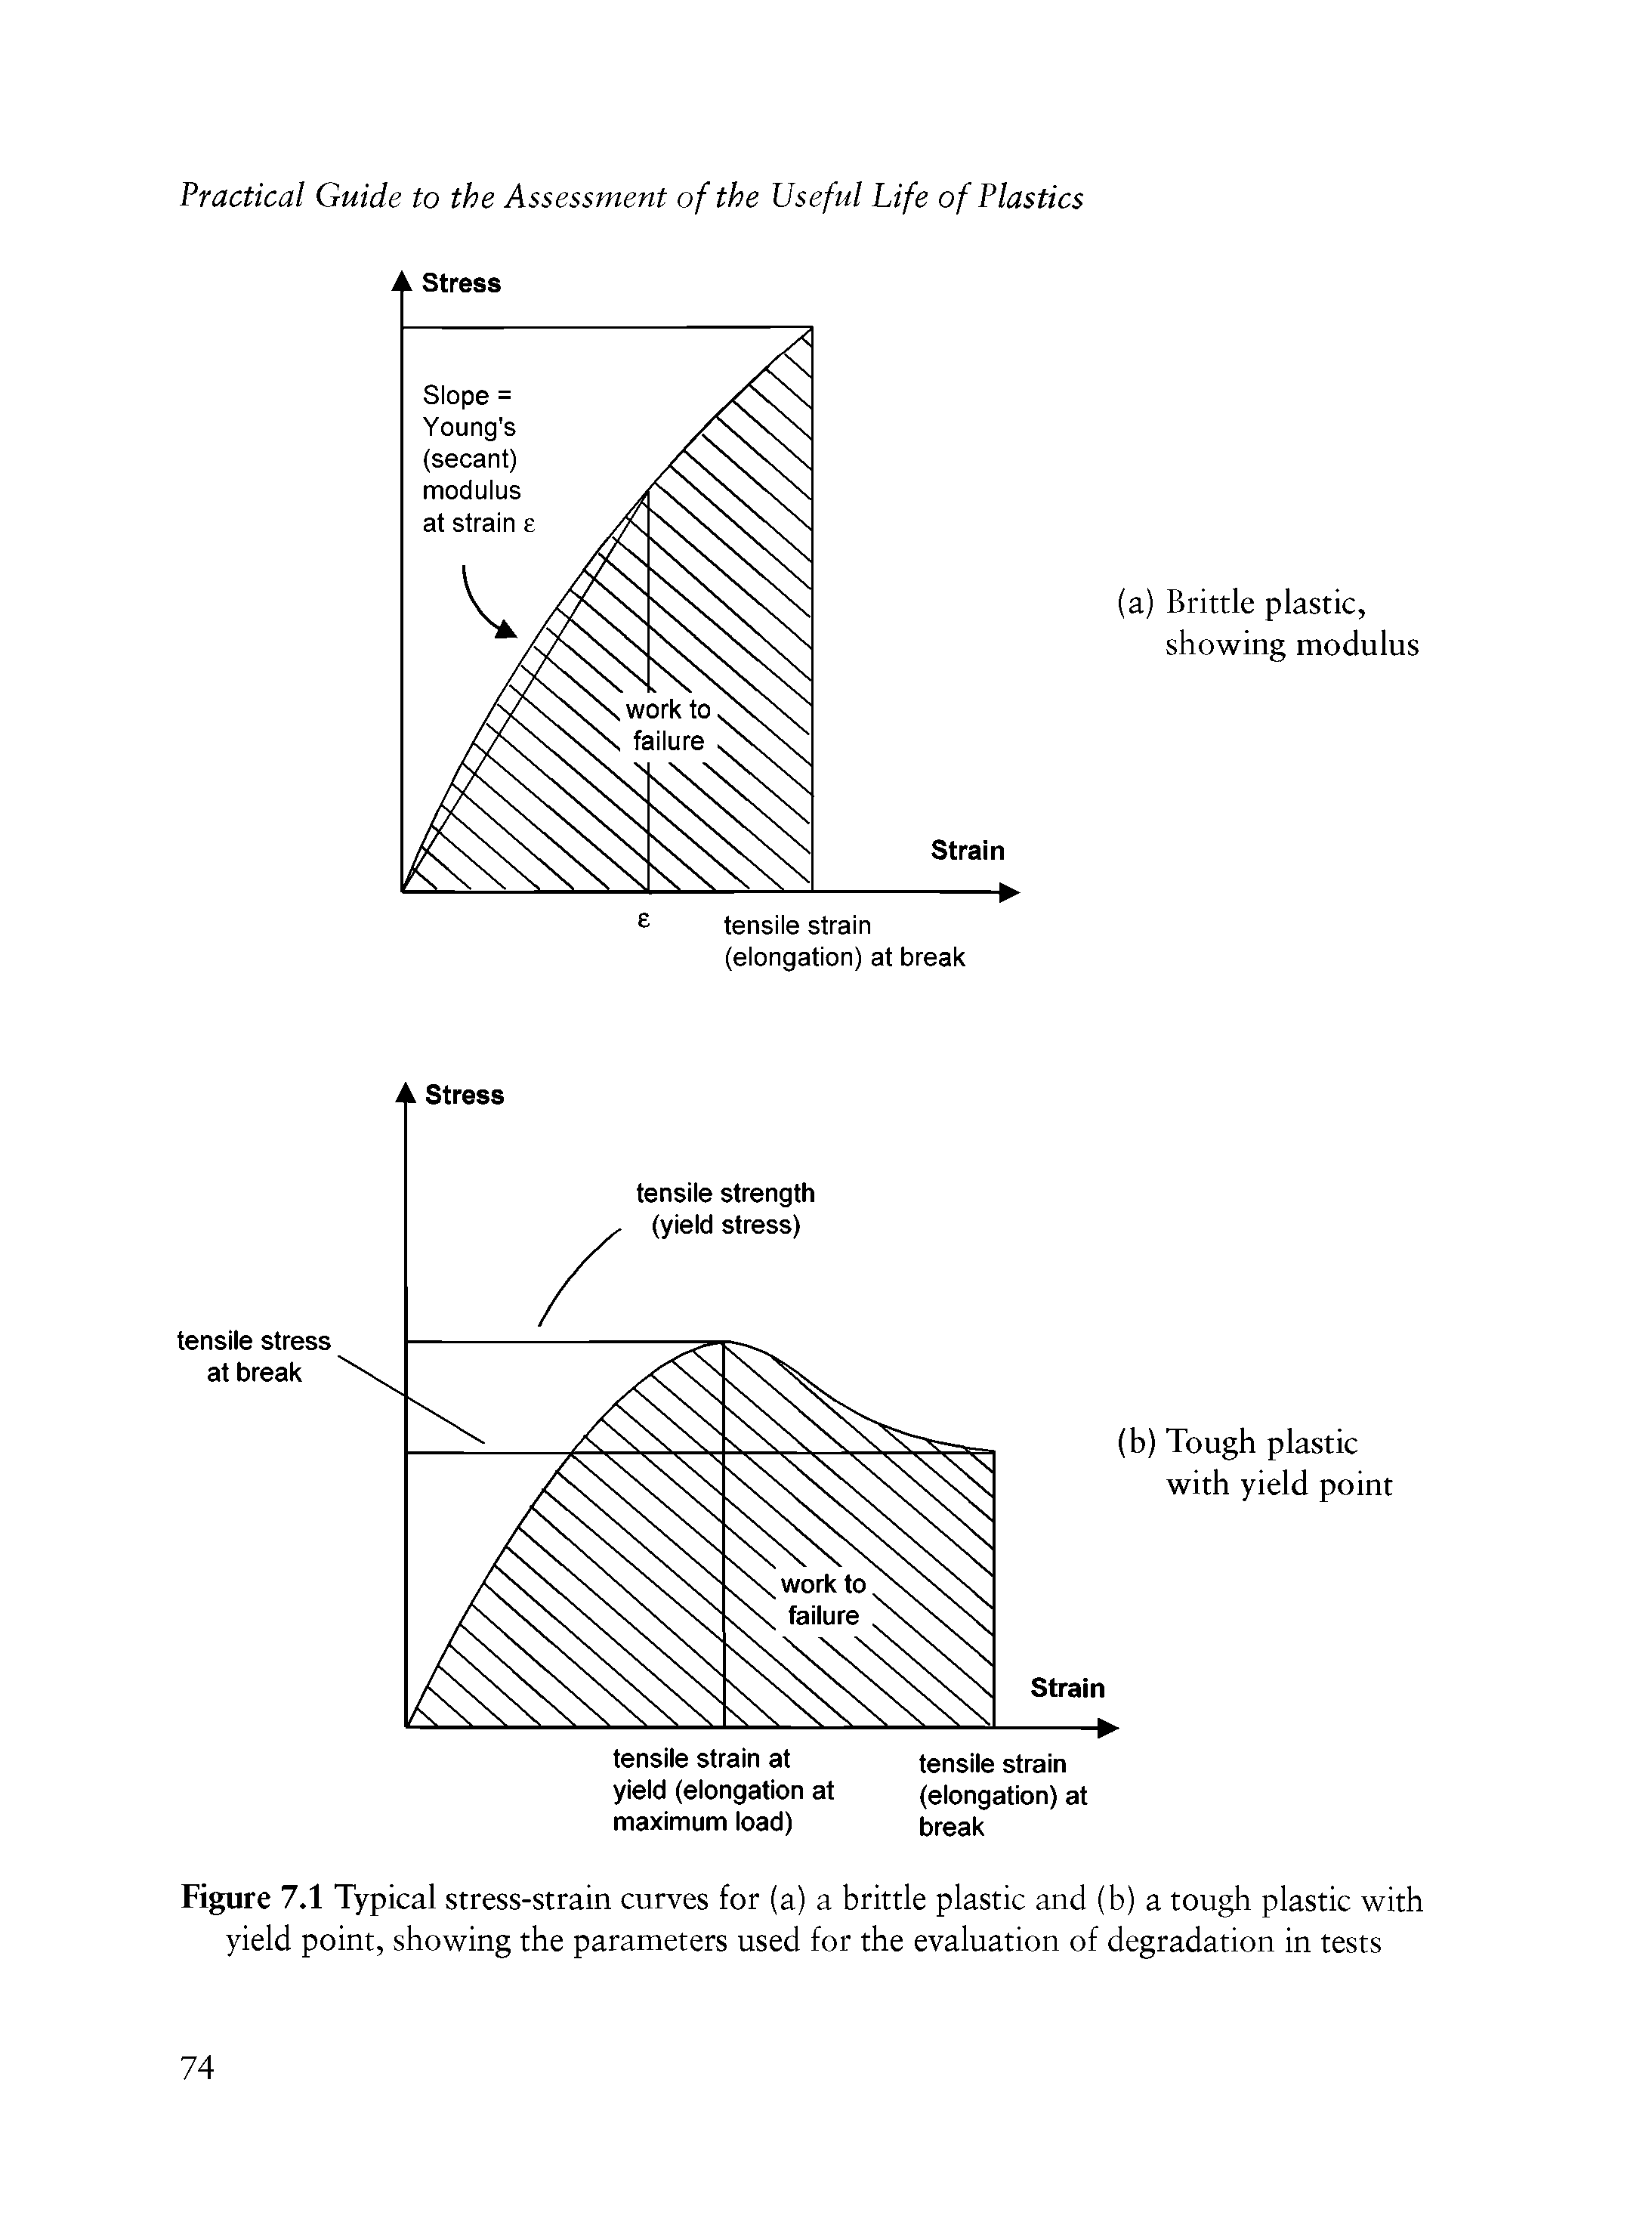 Figure 7.1 Typical stress-strain curves for (a) a brittle plastic and (b) a tough plastic with yield point, showing the parameters used for the evaluation of degradation in tests...